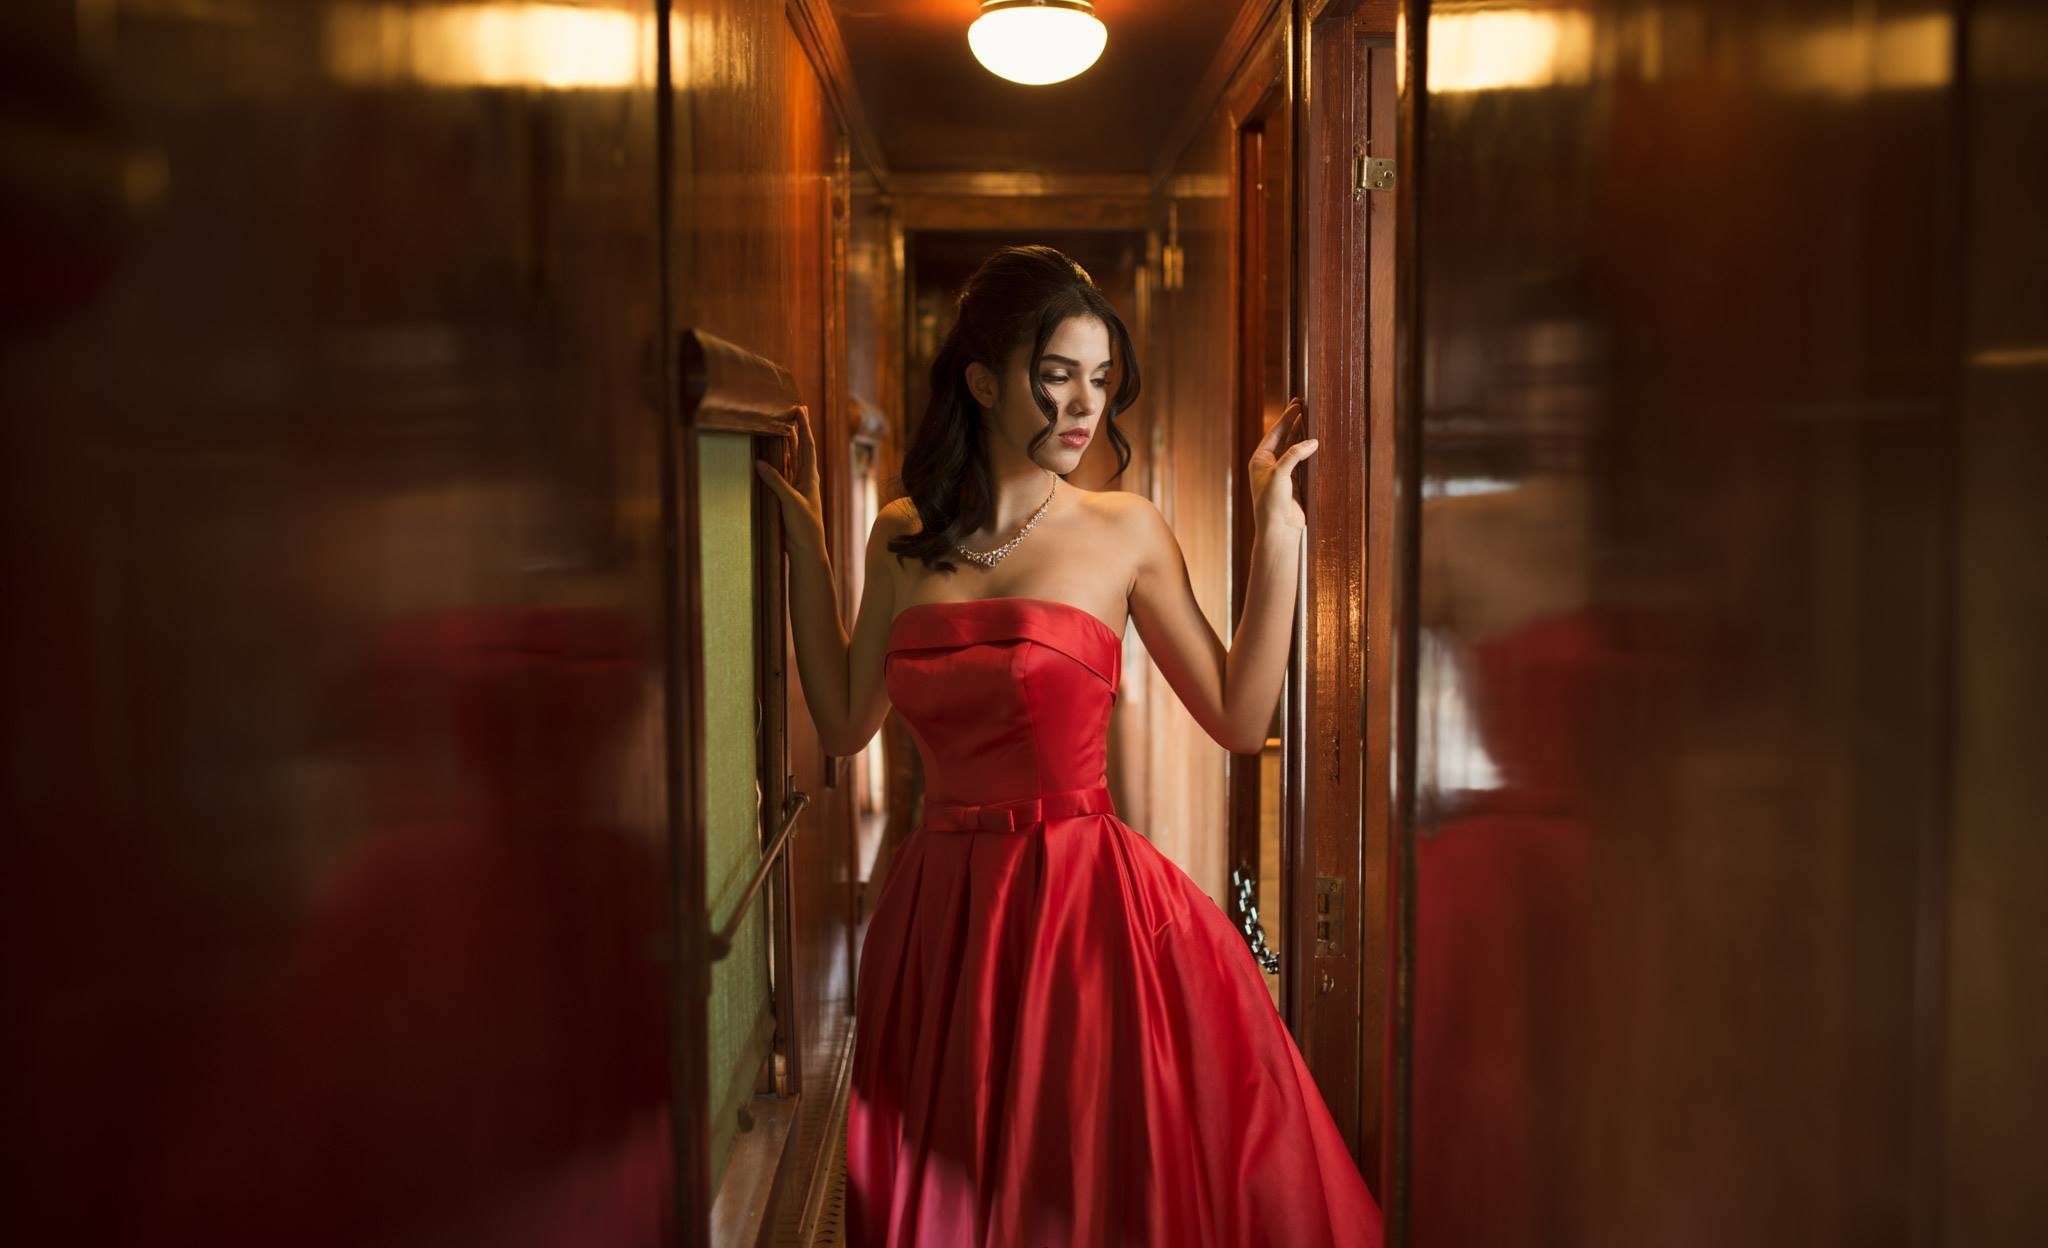 People 2048x1248 Kyle Cong dress red dress bare shoulders 500px women model strapless dress necklace satin